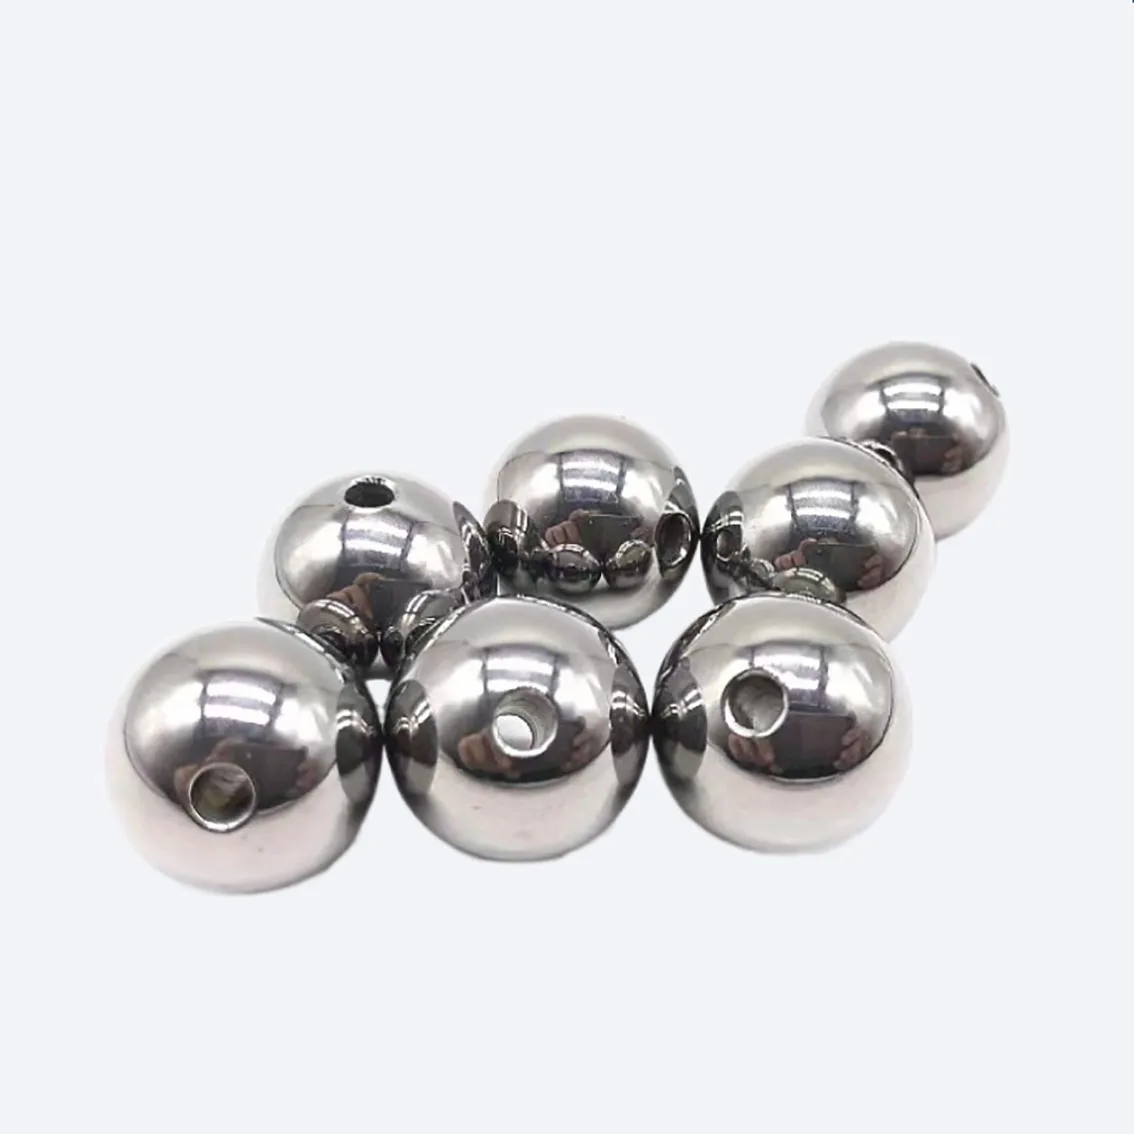 

1Pcs Stainless Steel Ball 14mm-60mm Through Mail Eye Loose Bead DIY Accessories Perforation Drilling Solid Steel Ball